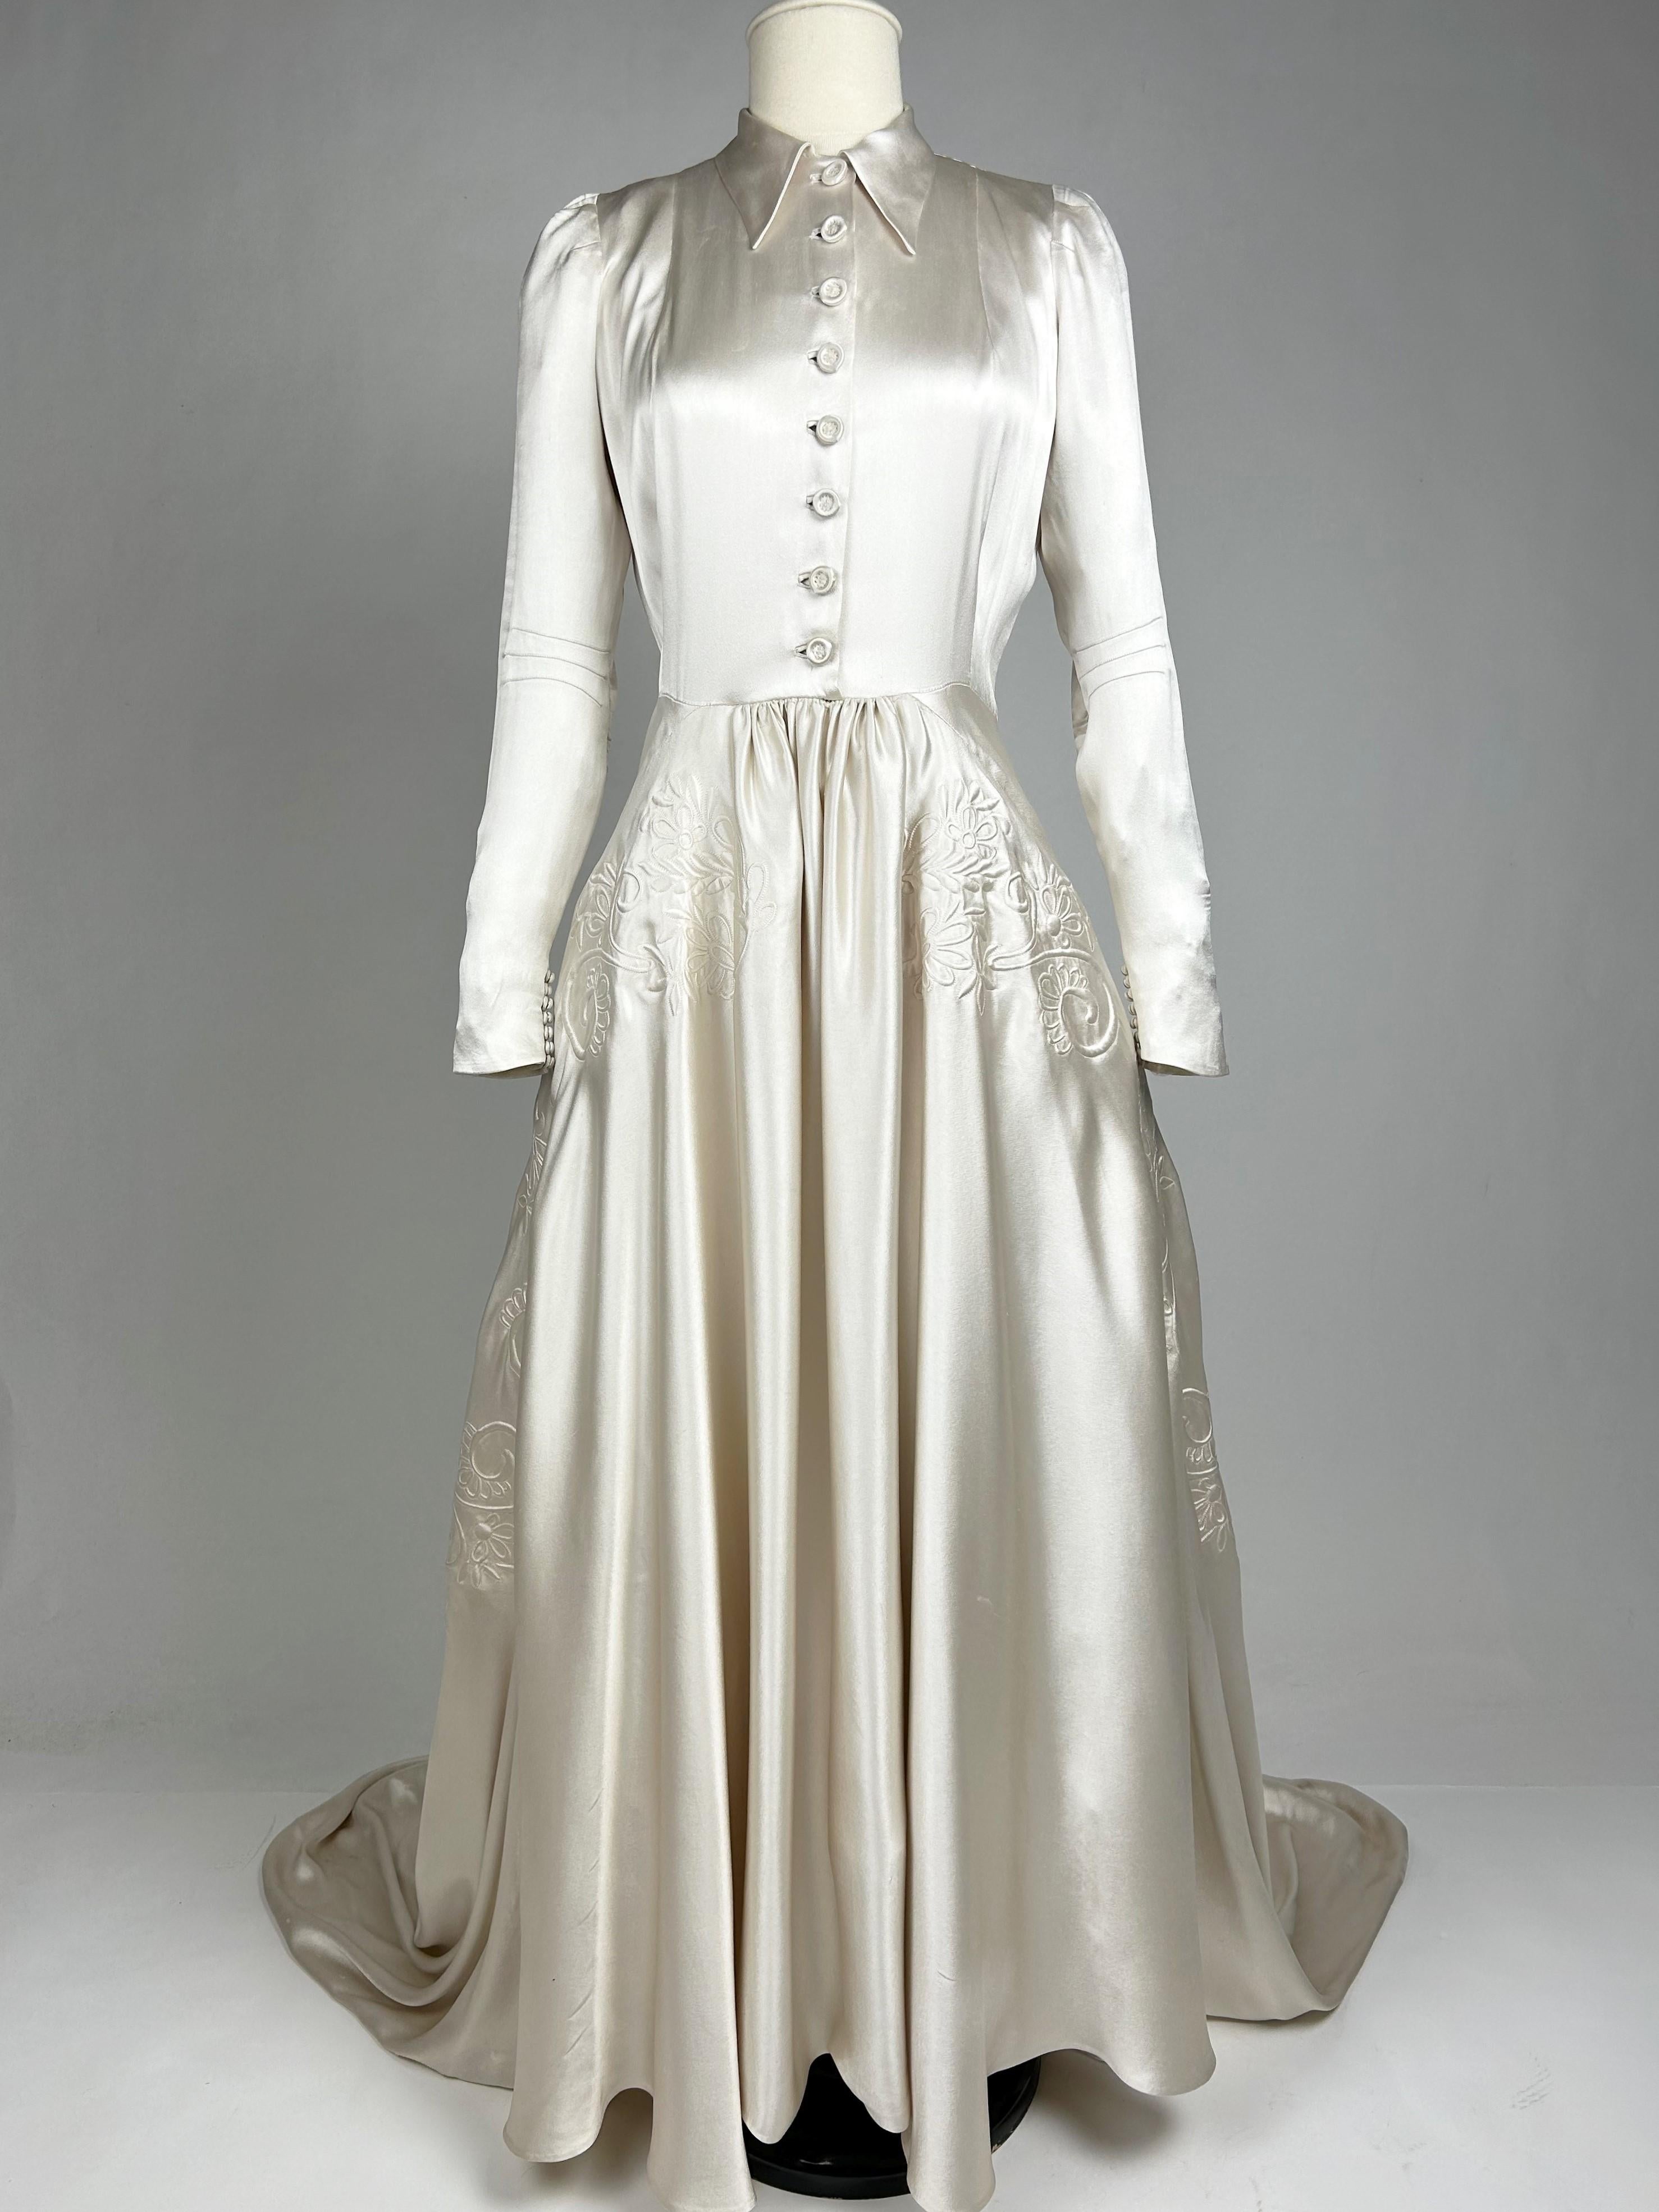 A Champagne Embroidered Satin Wedding Dress with train - France Circa 1940 For Sale 3